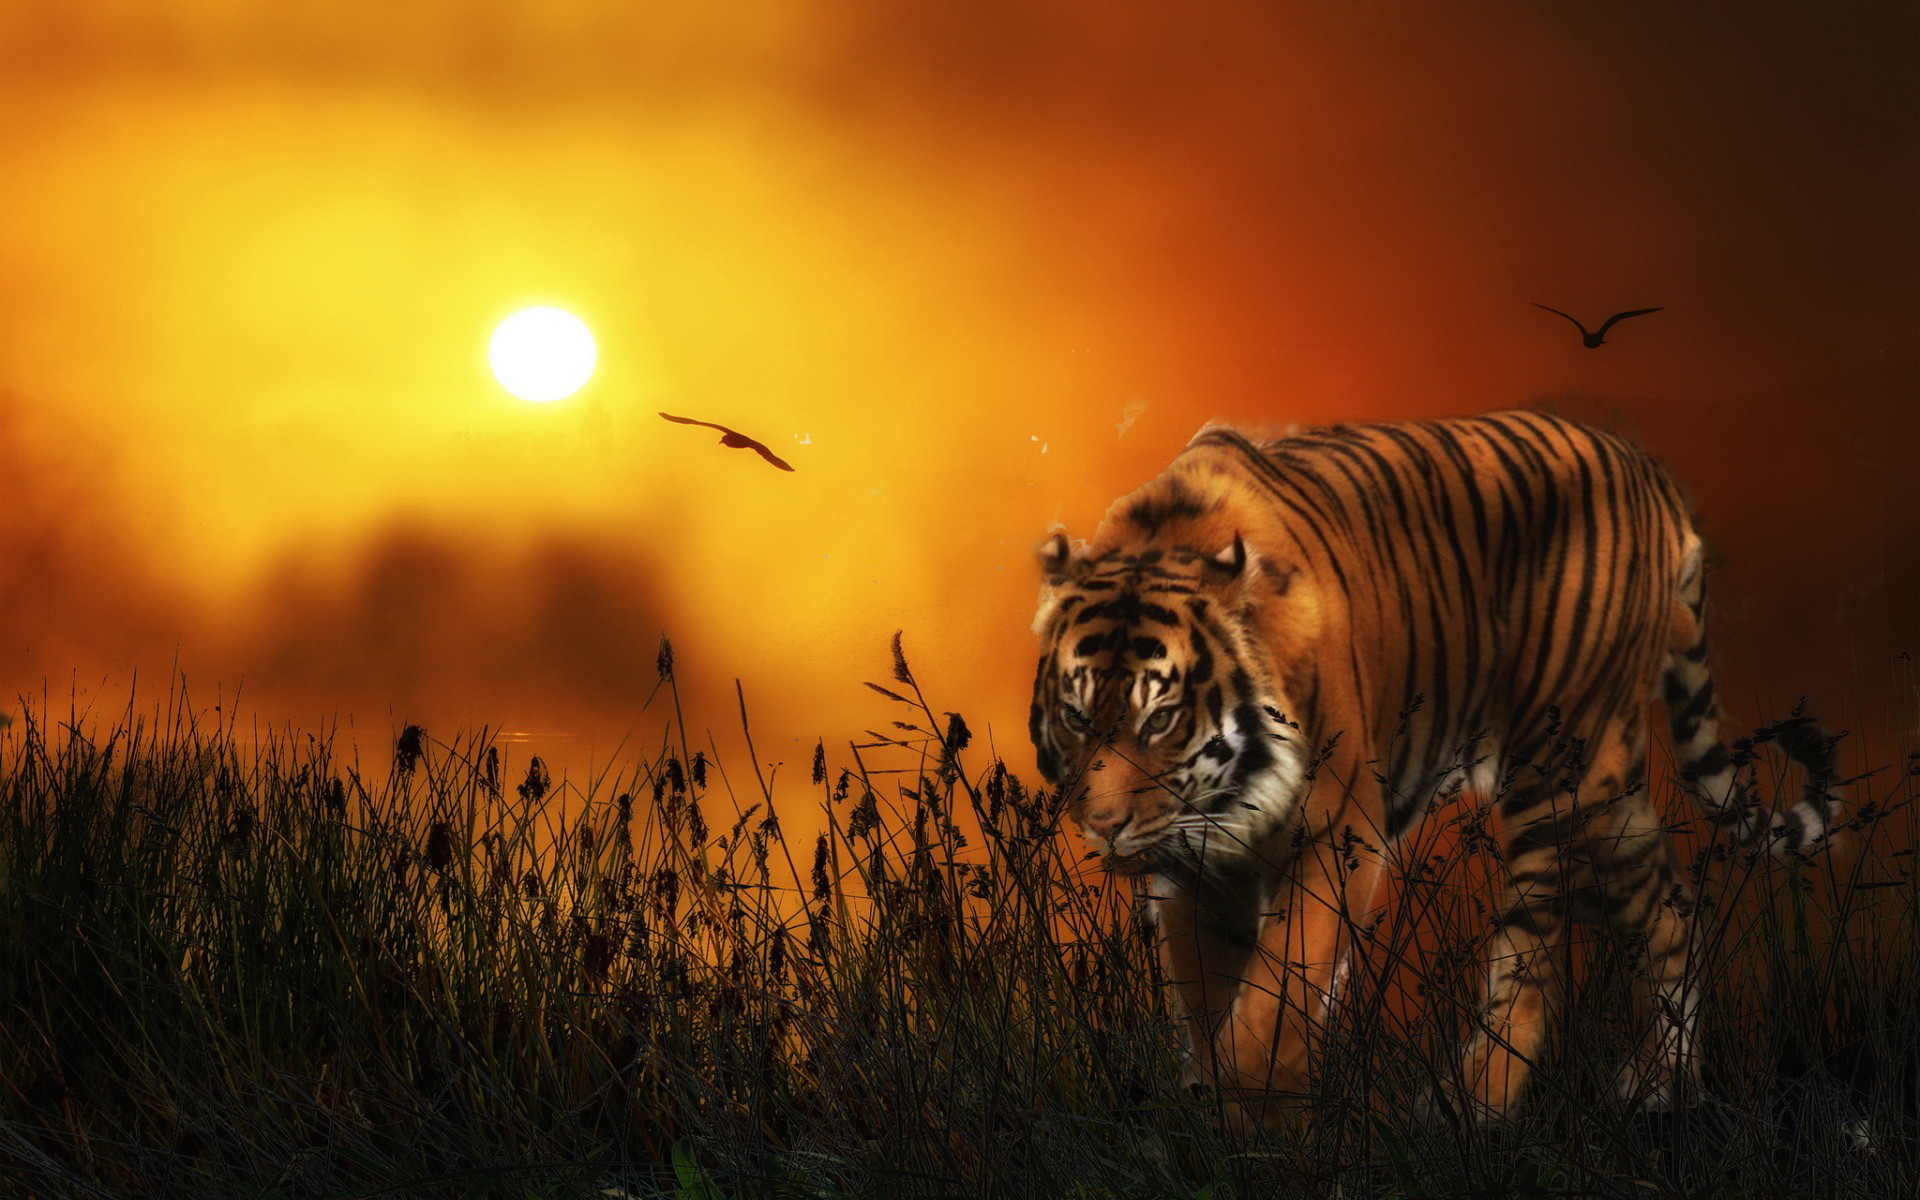 View Wallpaper Iphone Hd 1080P Tiger Pics - Best Wallpapers